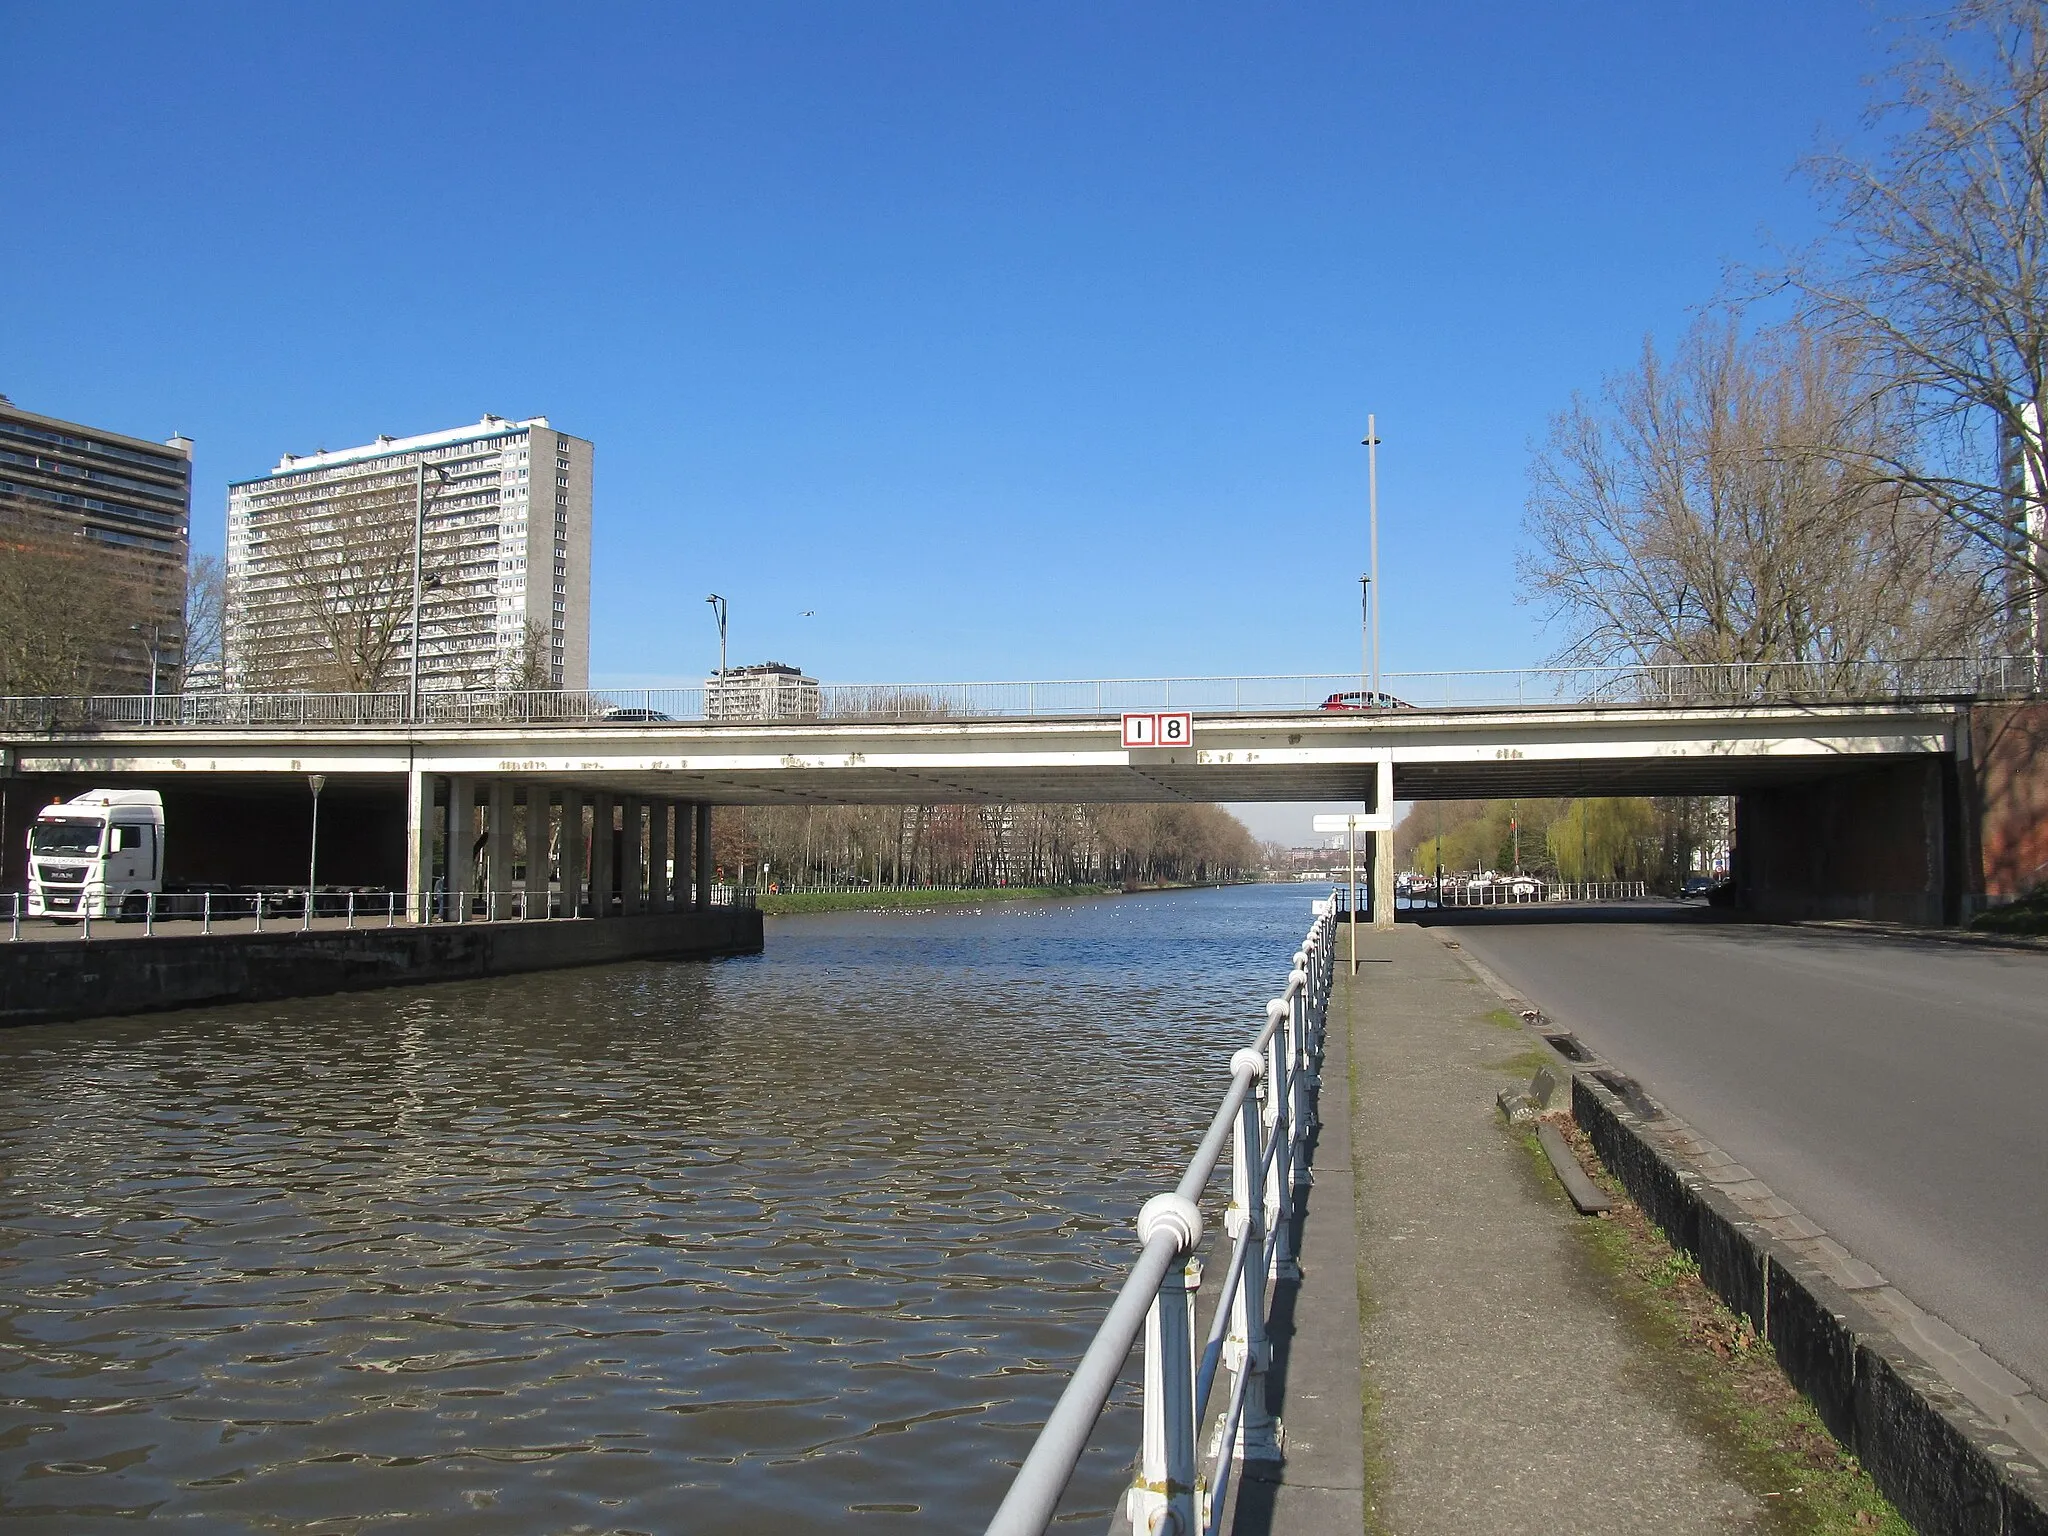 Photo showing: The Pont Paepsem / Paepsembrug (Paepsem Bridge) over the Brussels–Charleroi Canal in Anderlecht, one of the 19 municipalities of the Brussels-Capital Region.